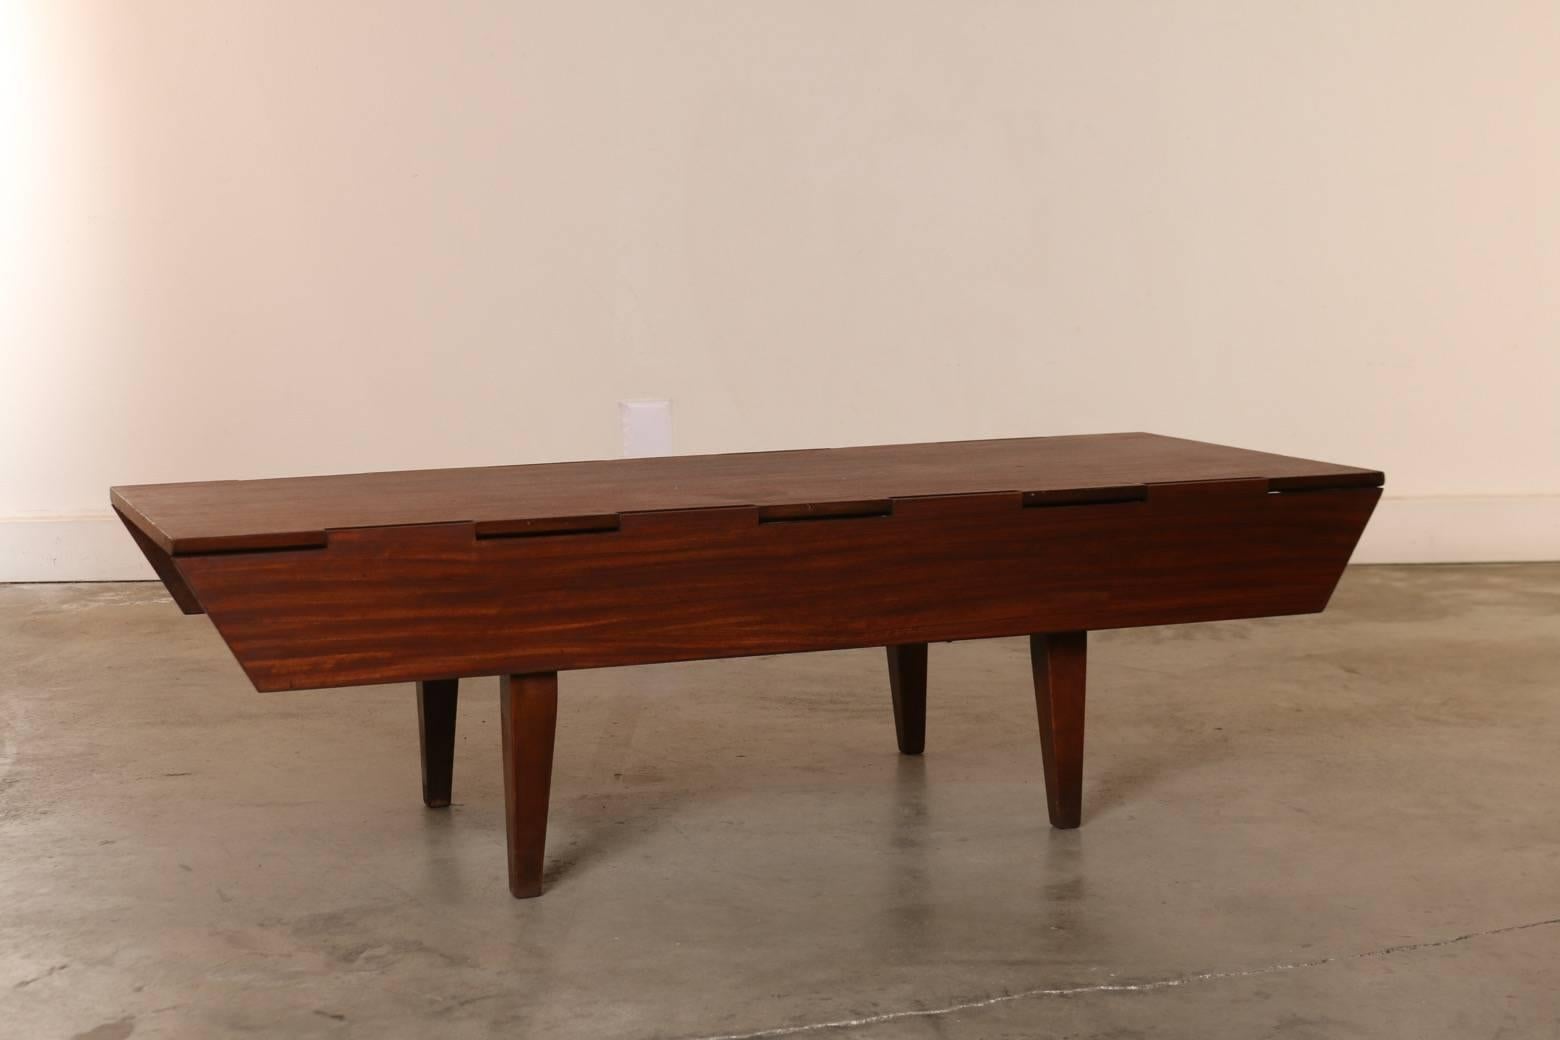 Convertible coffee table, dining table with fold down sides, by Milo Baughman for Drexel Perspective. Table dimensions 60 inches long x 39 inches wide (27 inches wide with side extensions down). A wonderful design lovers talking point and fully